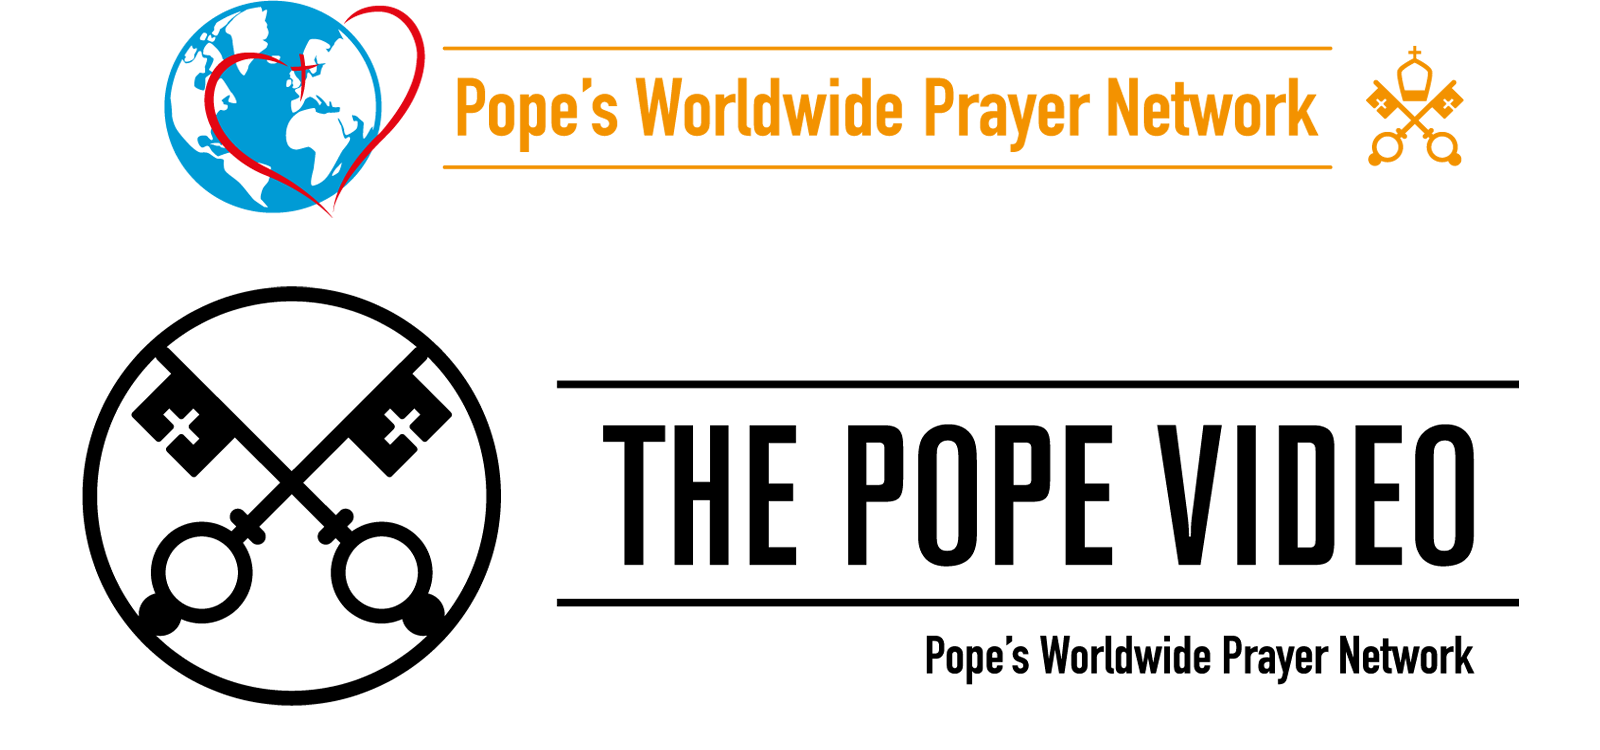 The Pope Video The Pope Video is a global initiative developed by the